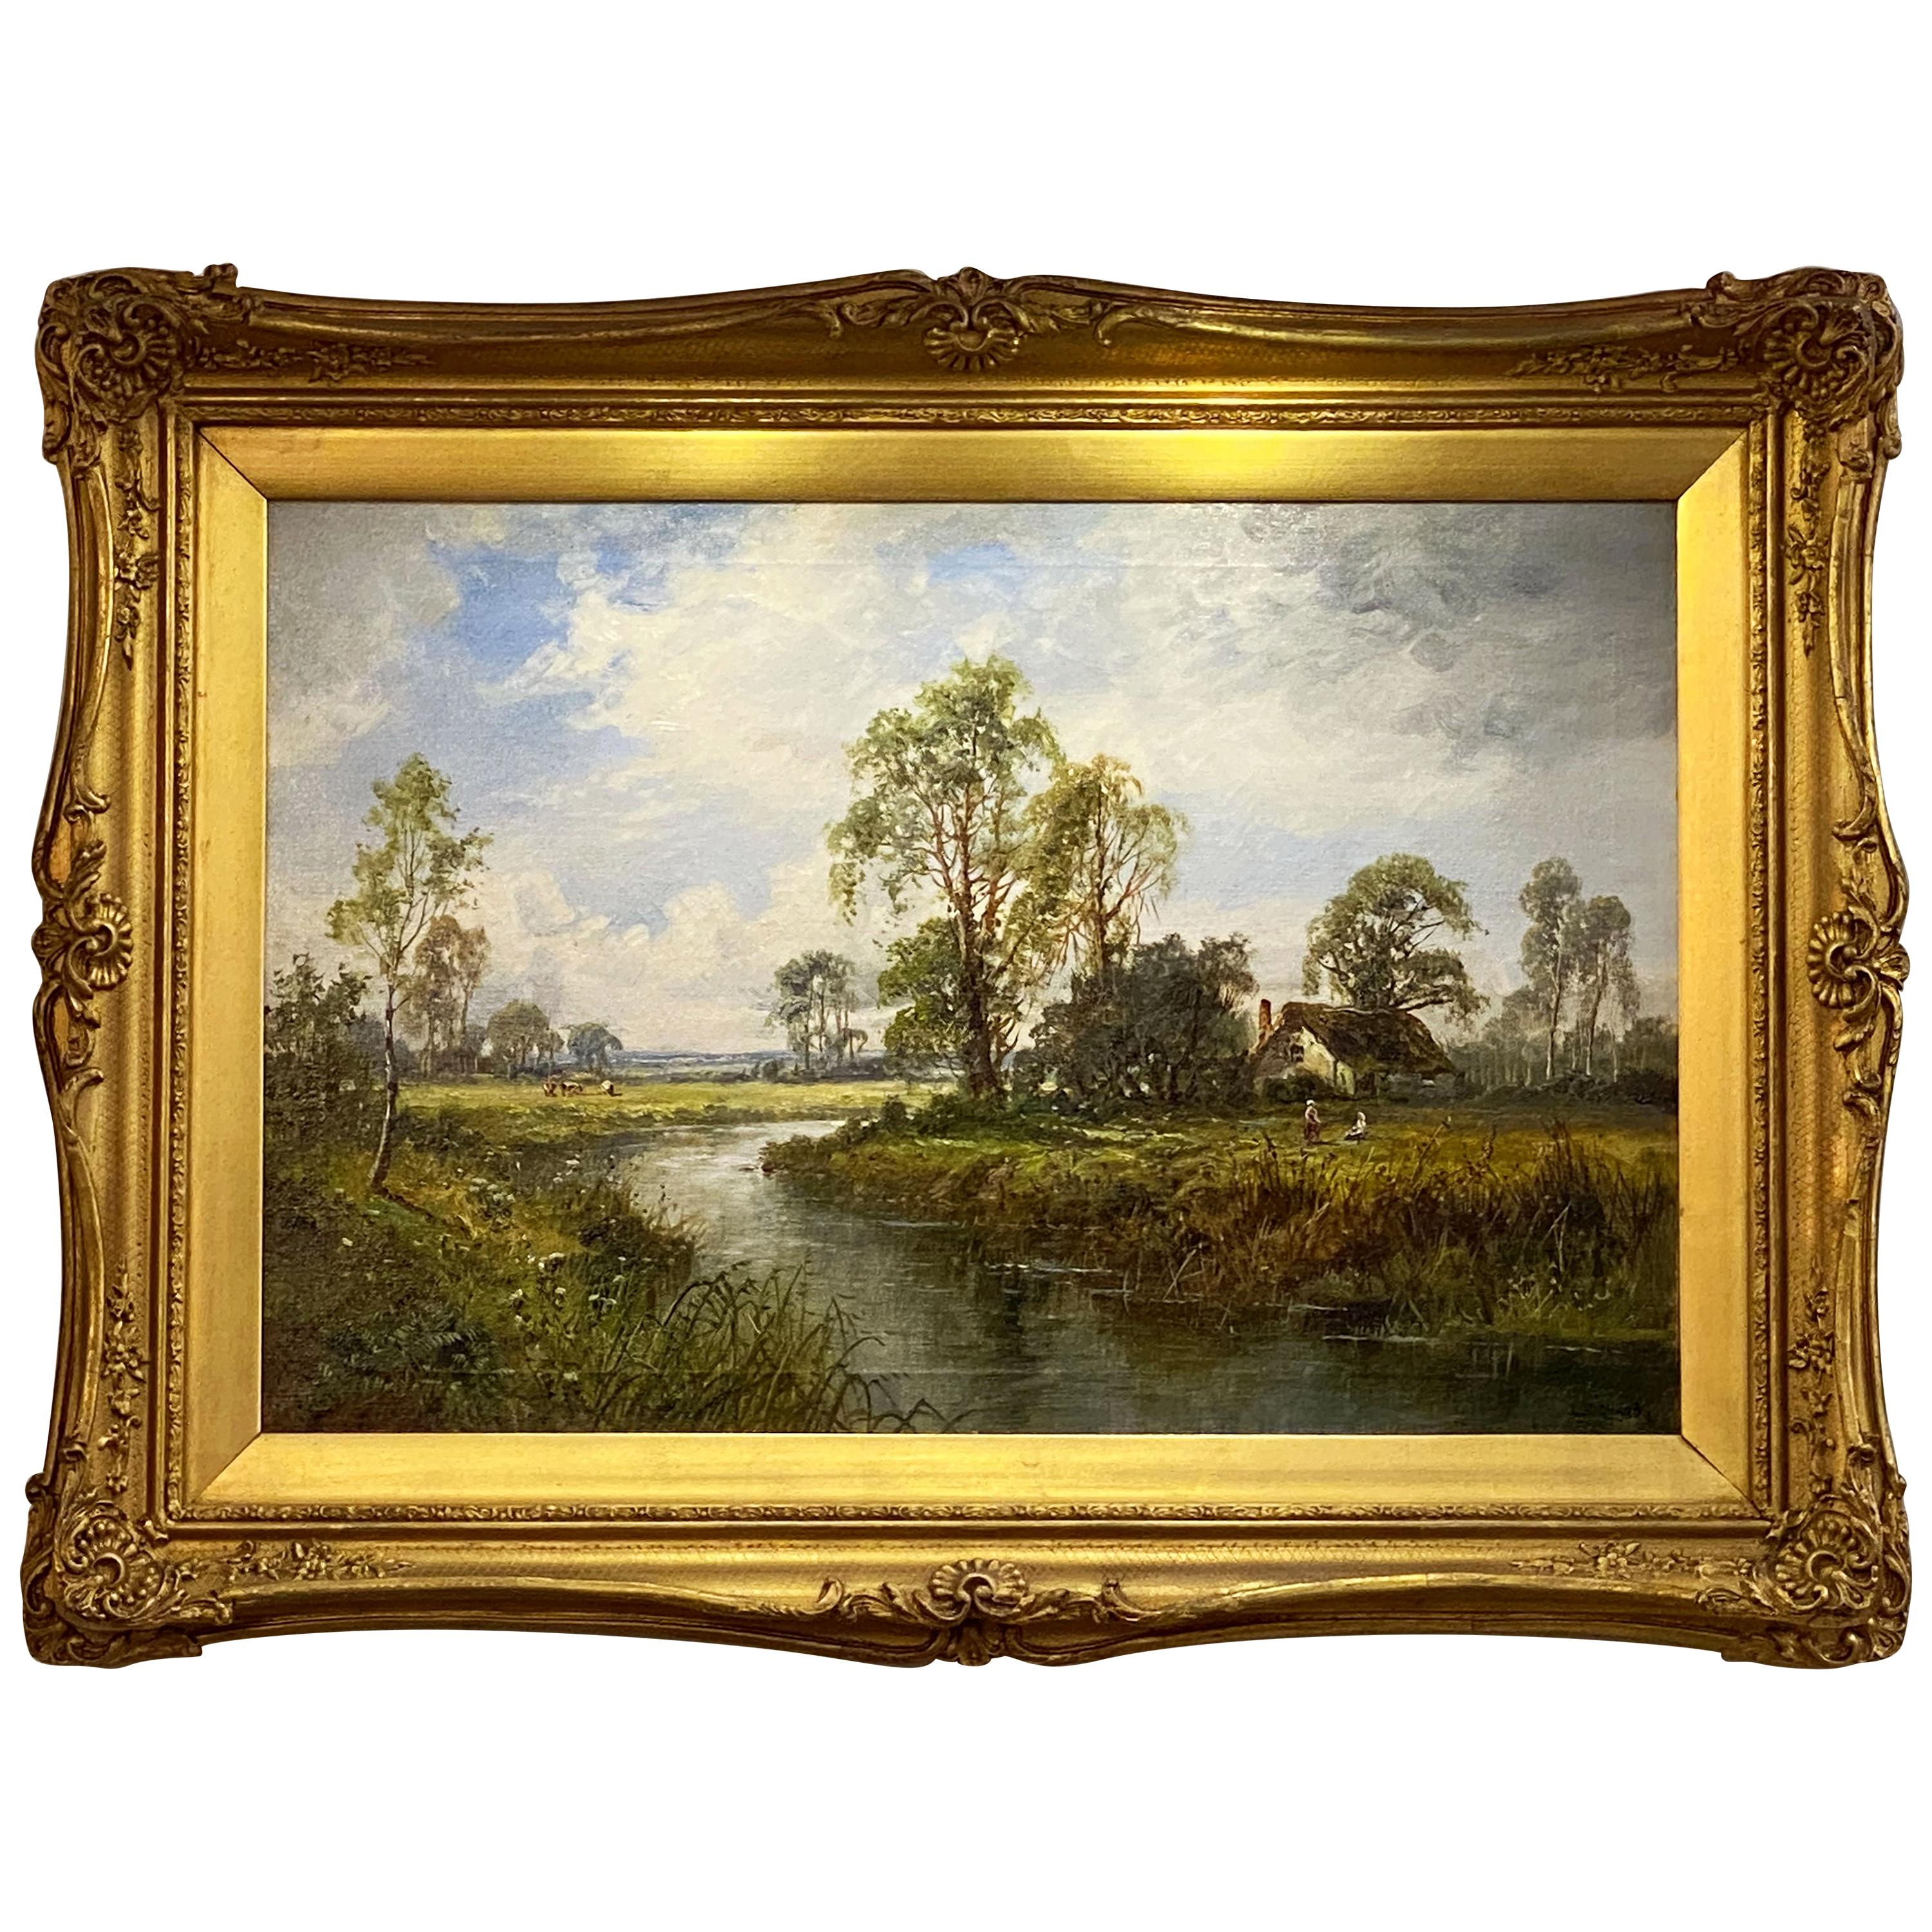 English Framed Oil Painting of a River Landscape by L. Richards